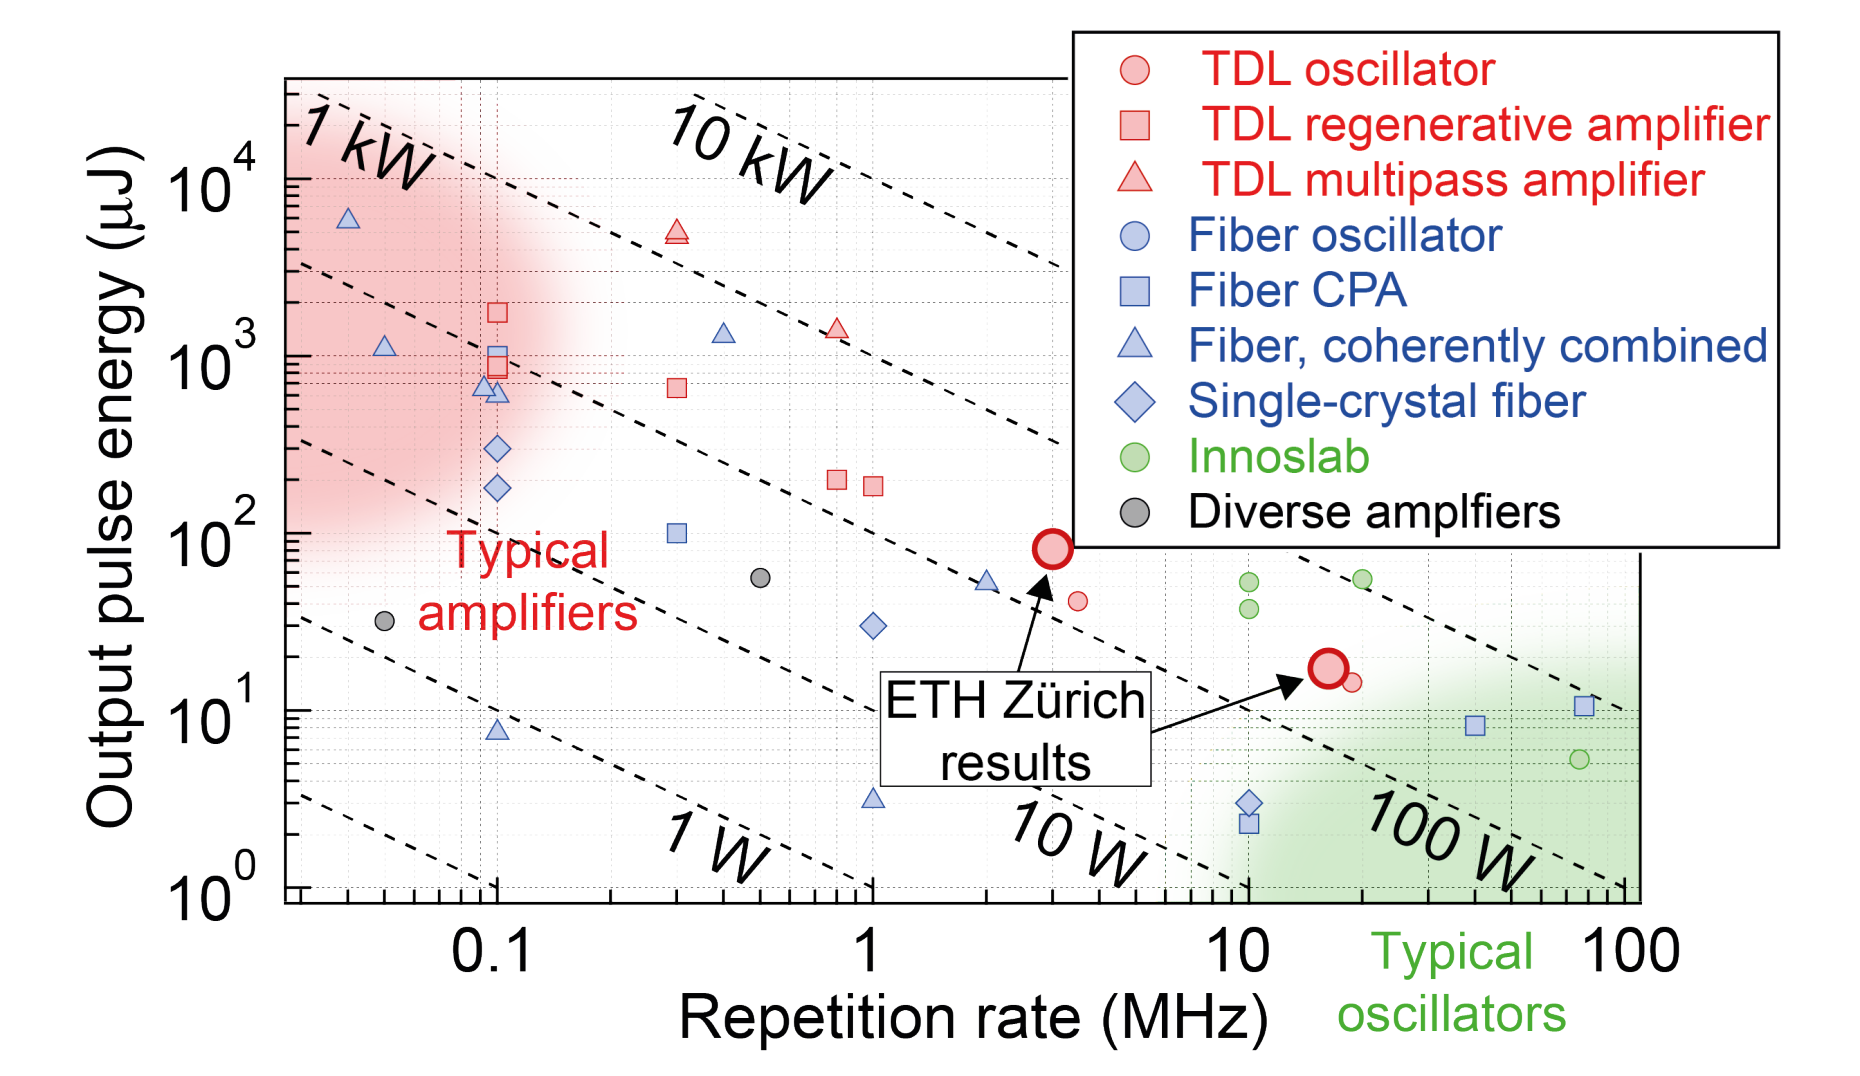 Enlarged view: Overview of high-power ultrafast systems